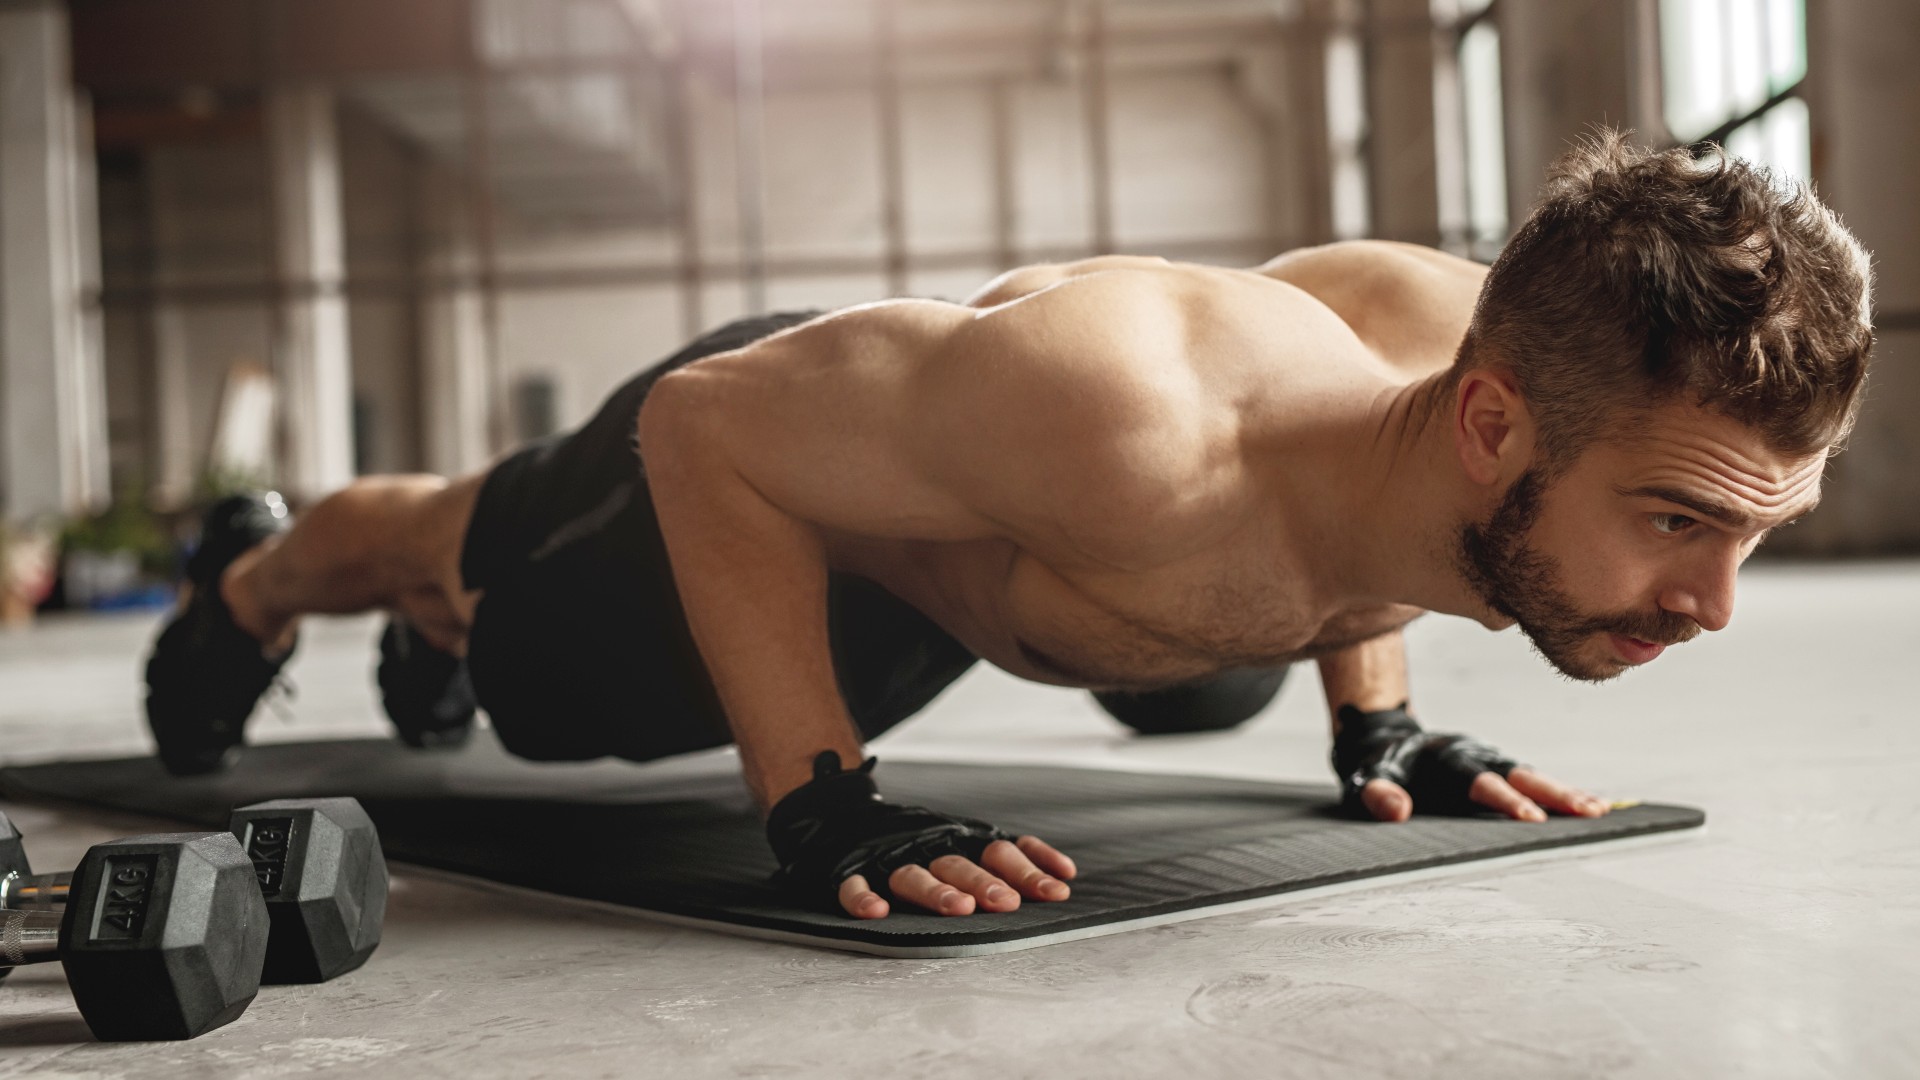 Man performing a push-up during workout with dumbbells next to him